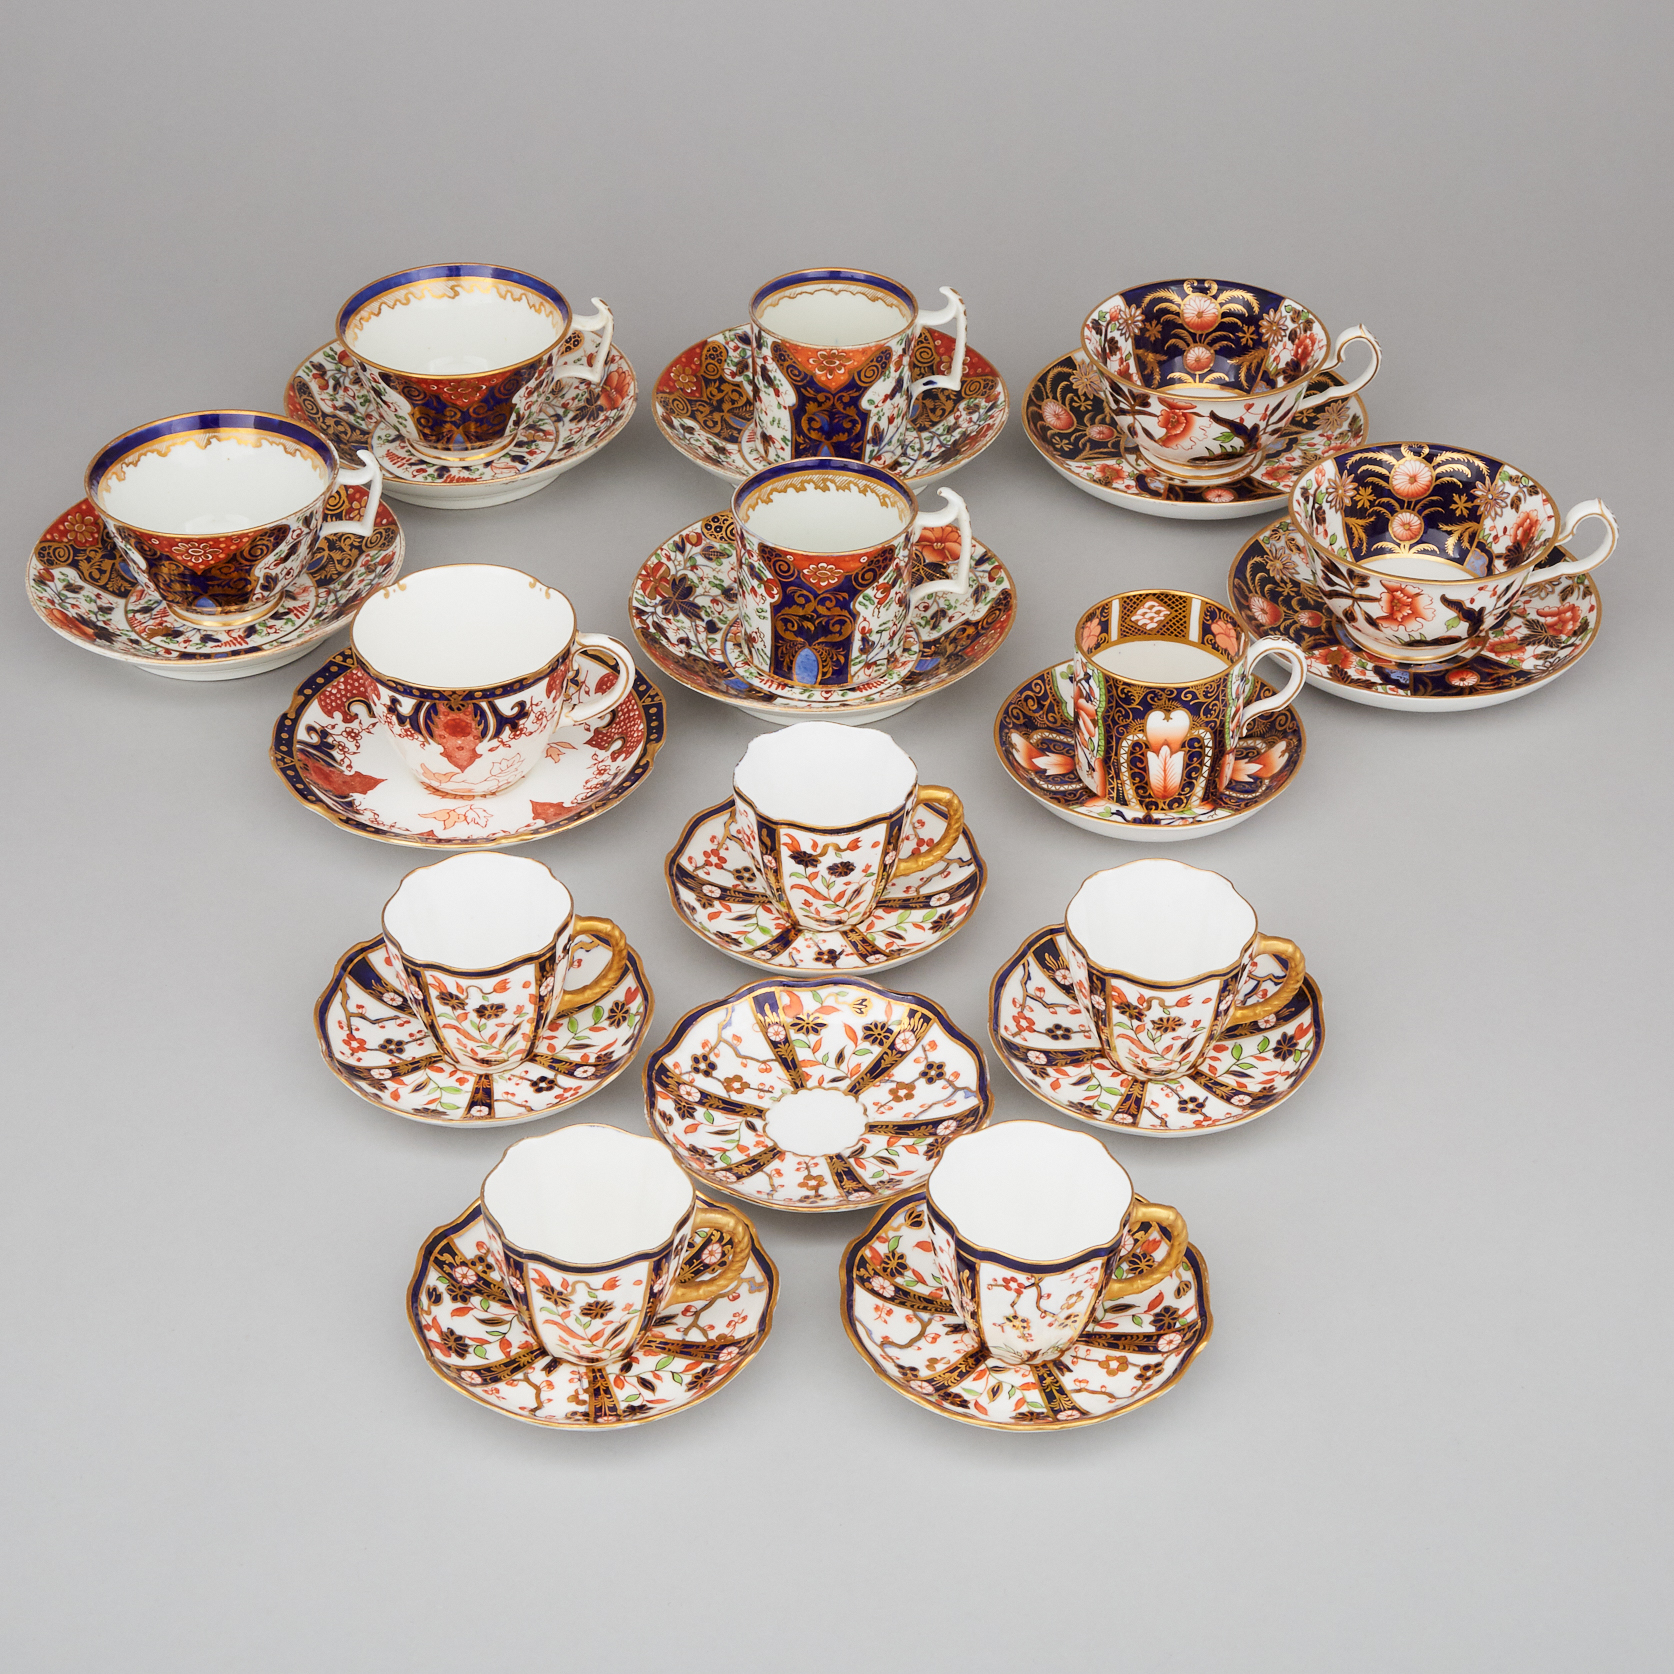 Thirteen Various Derby Japan Pattern Cups and Saucers, 19th/20th century